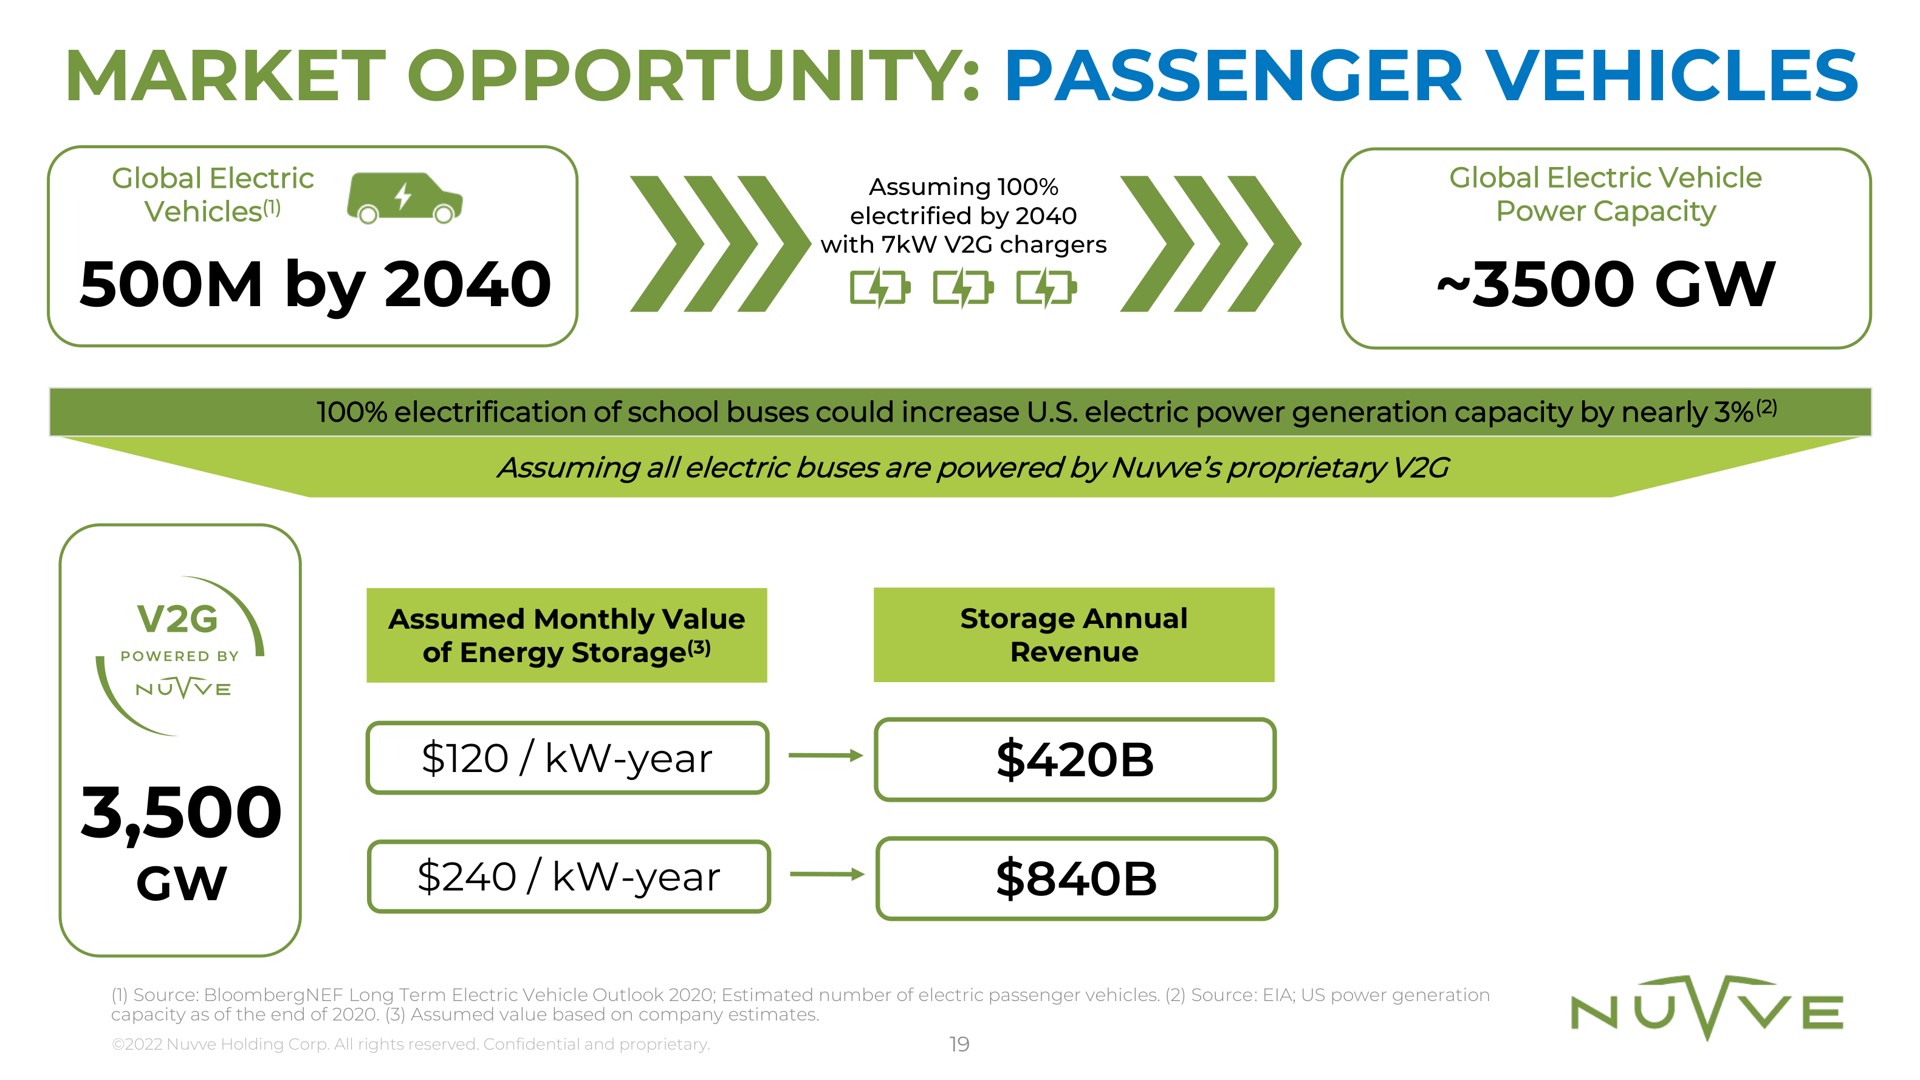 market opportunity passenger vehicles by power capacity | Nuvve